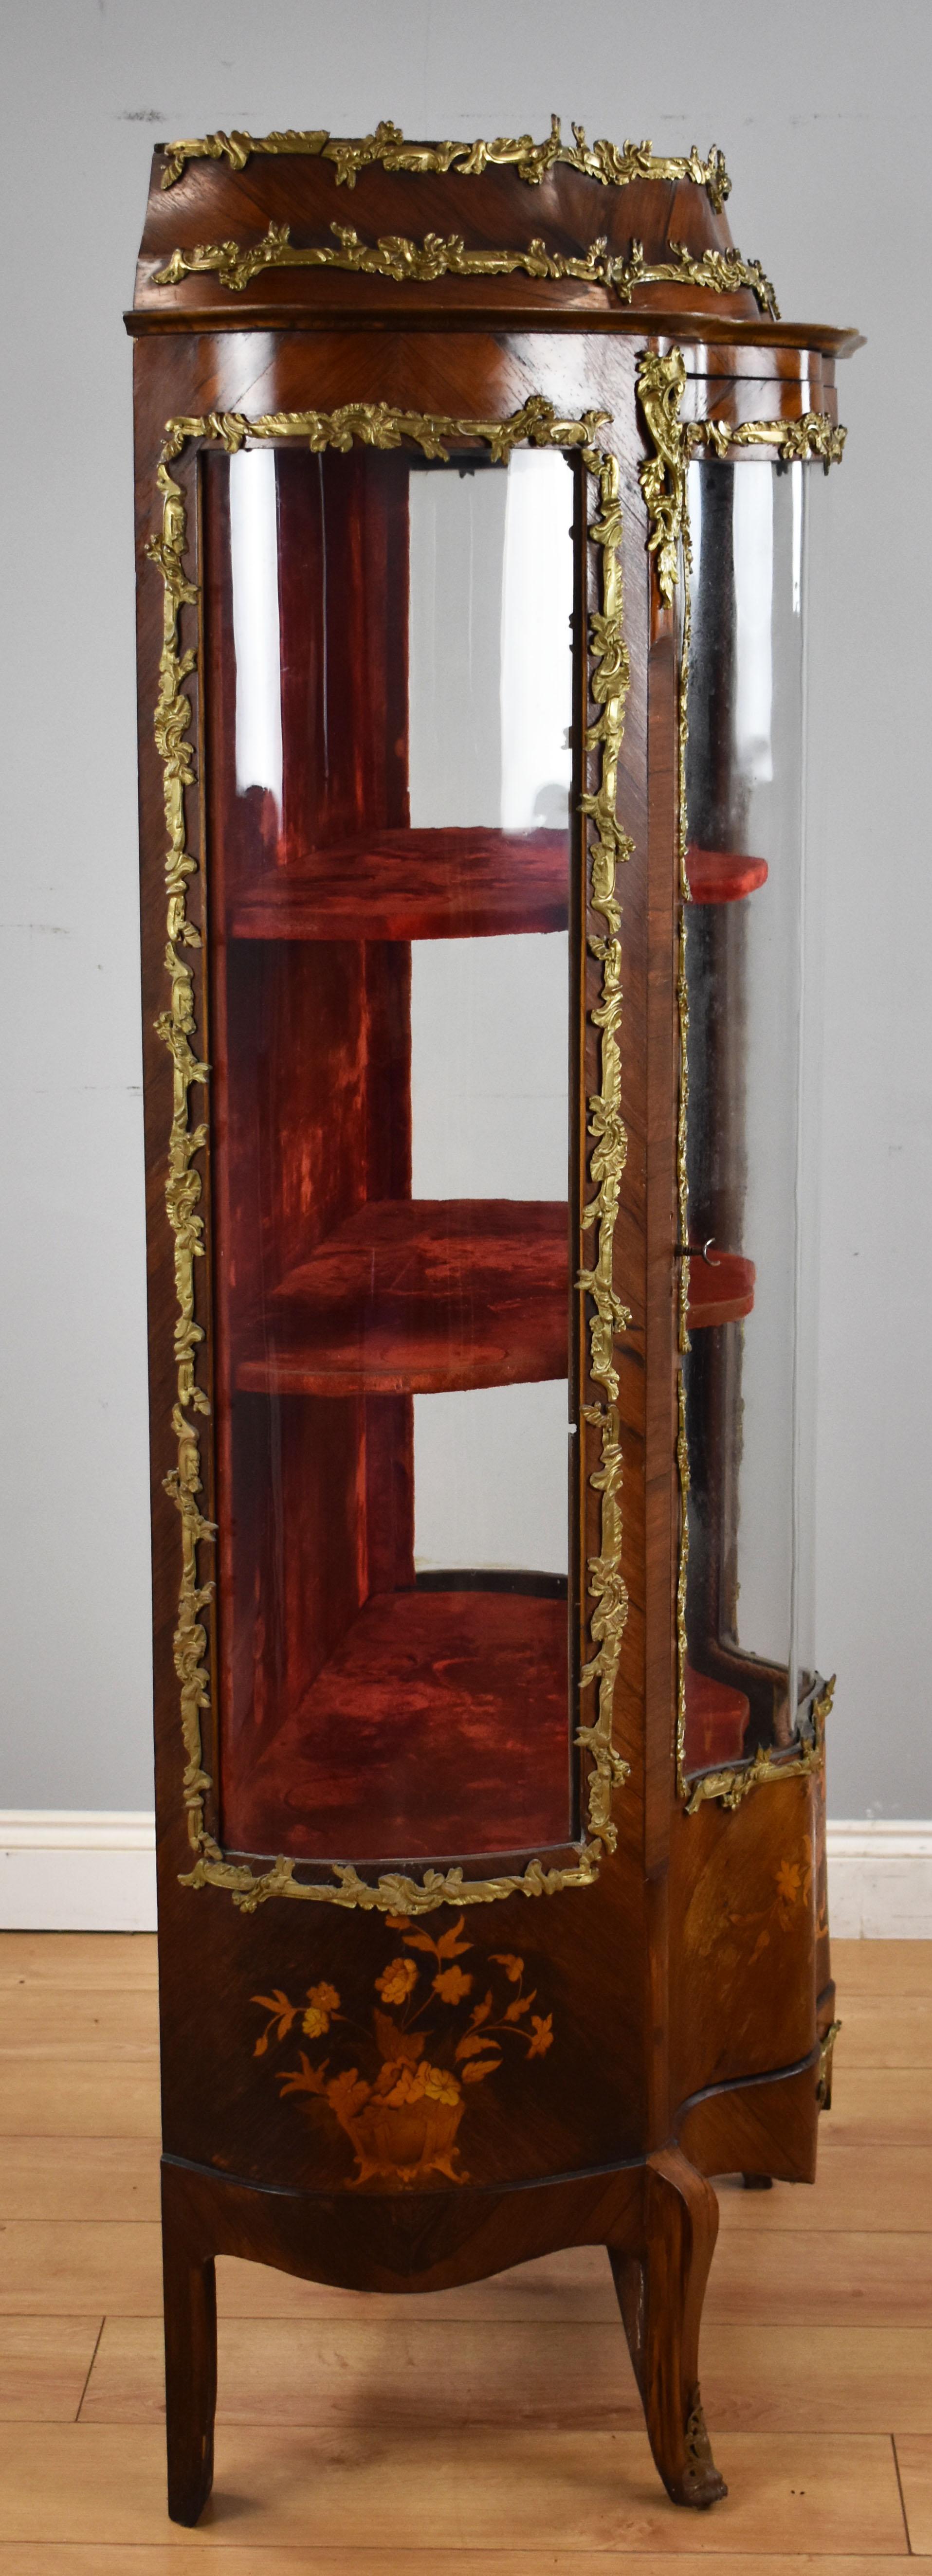 For sale is a good quality 19th century French marquetry serpentine fronted display cabinet. The cabinet is crowned with ormolu mounts, with more below. On each side of the cabinet is a bowed pane of glass displaying the rich velvet interior. The